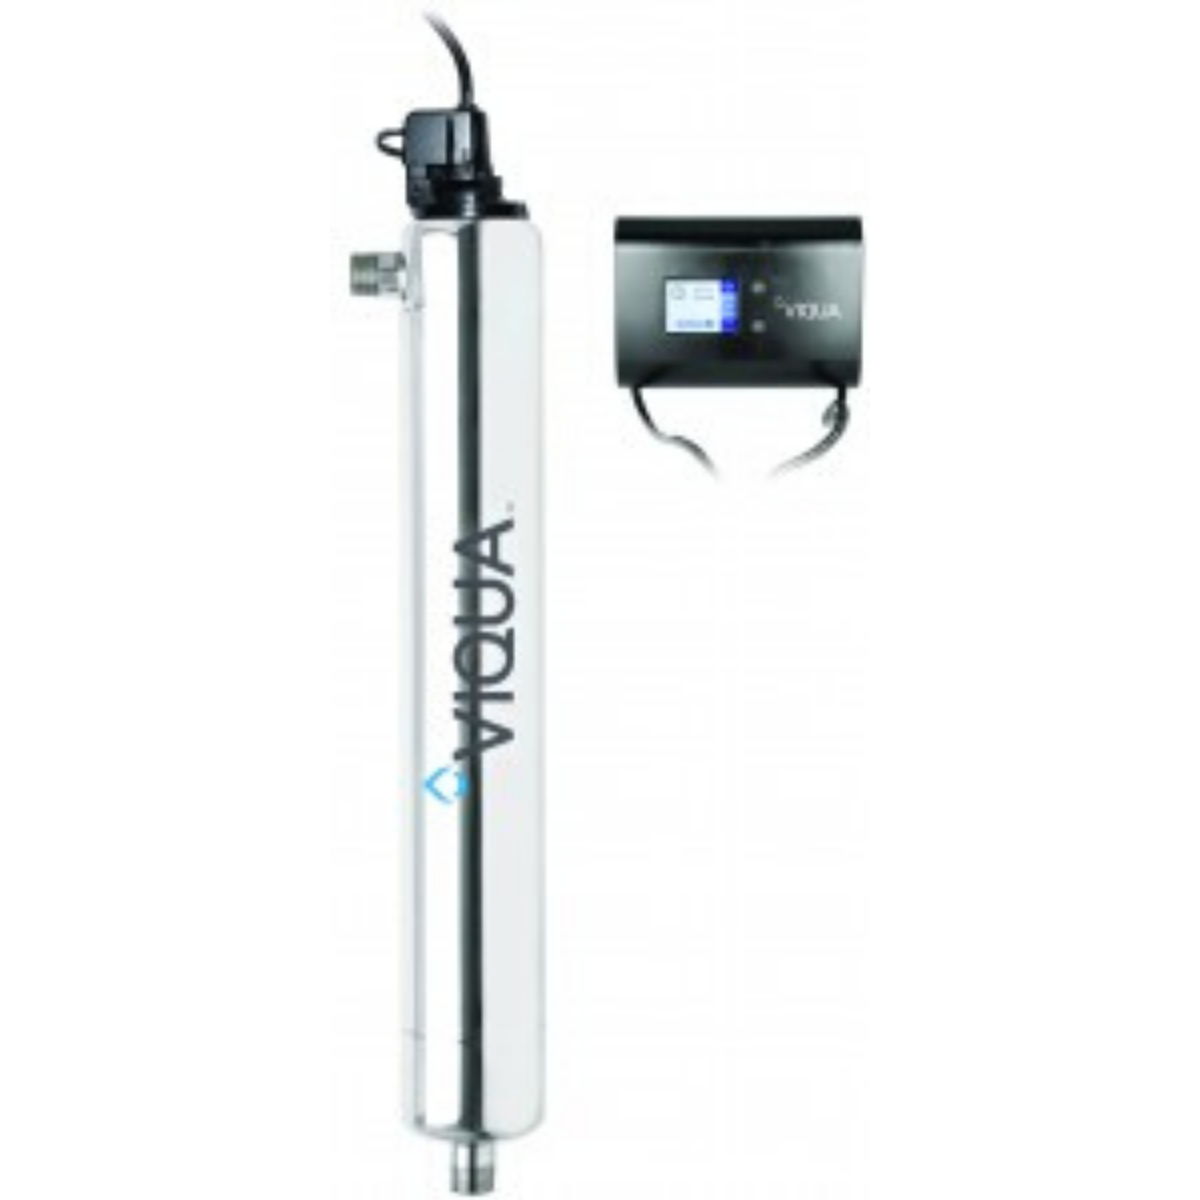 E4 Professional UV Water Treatment System